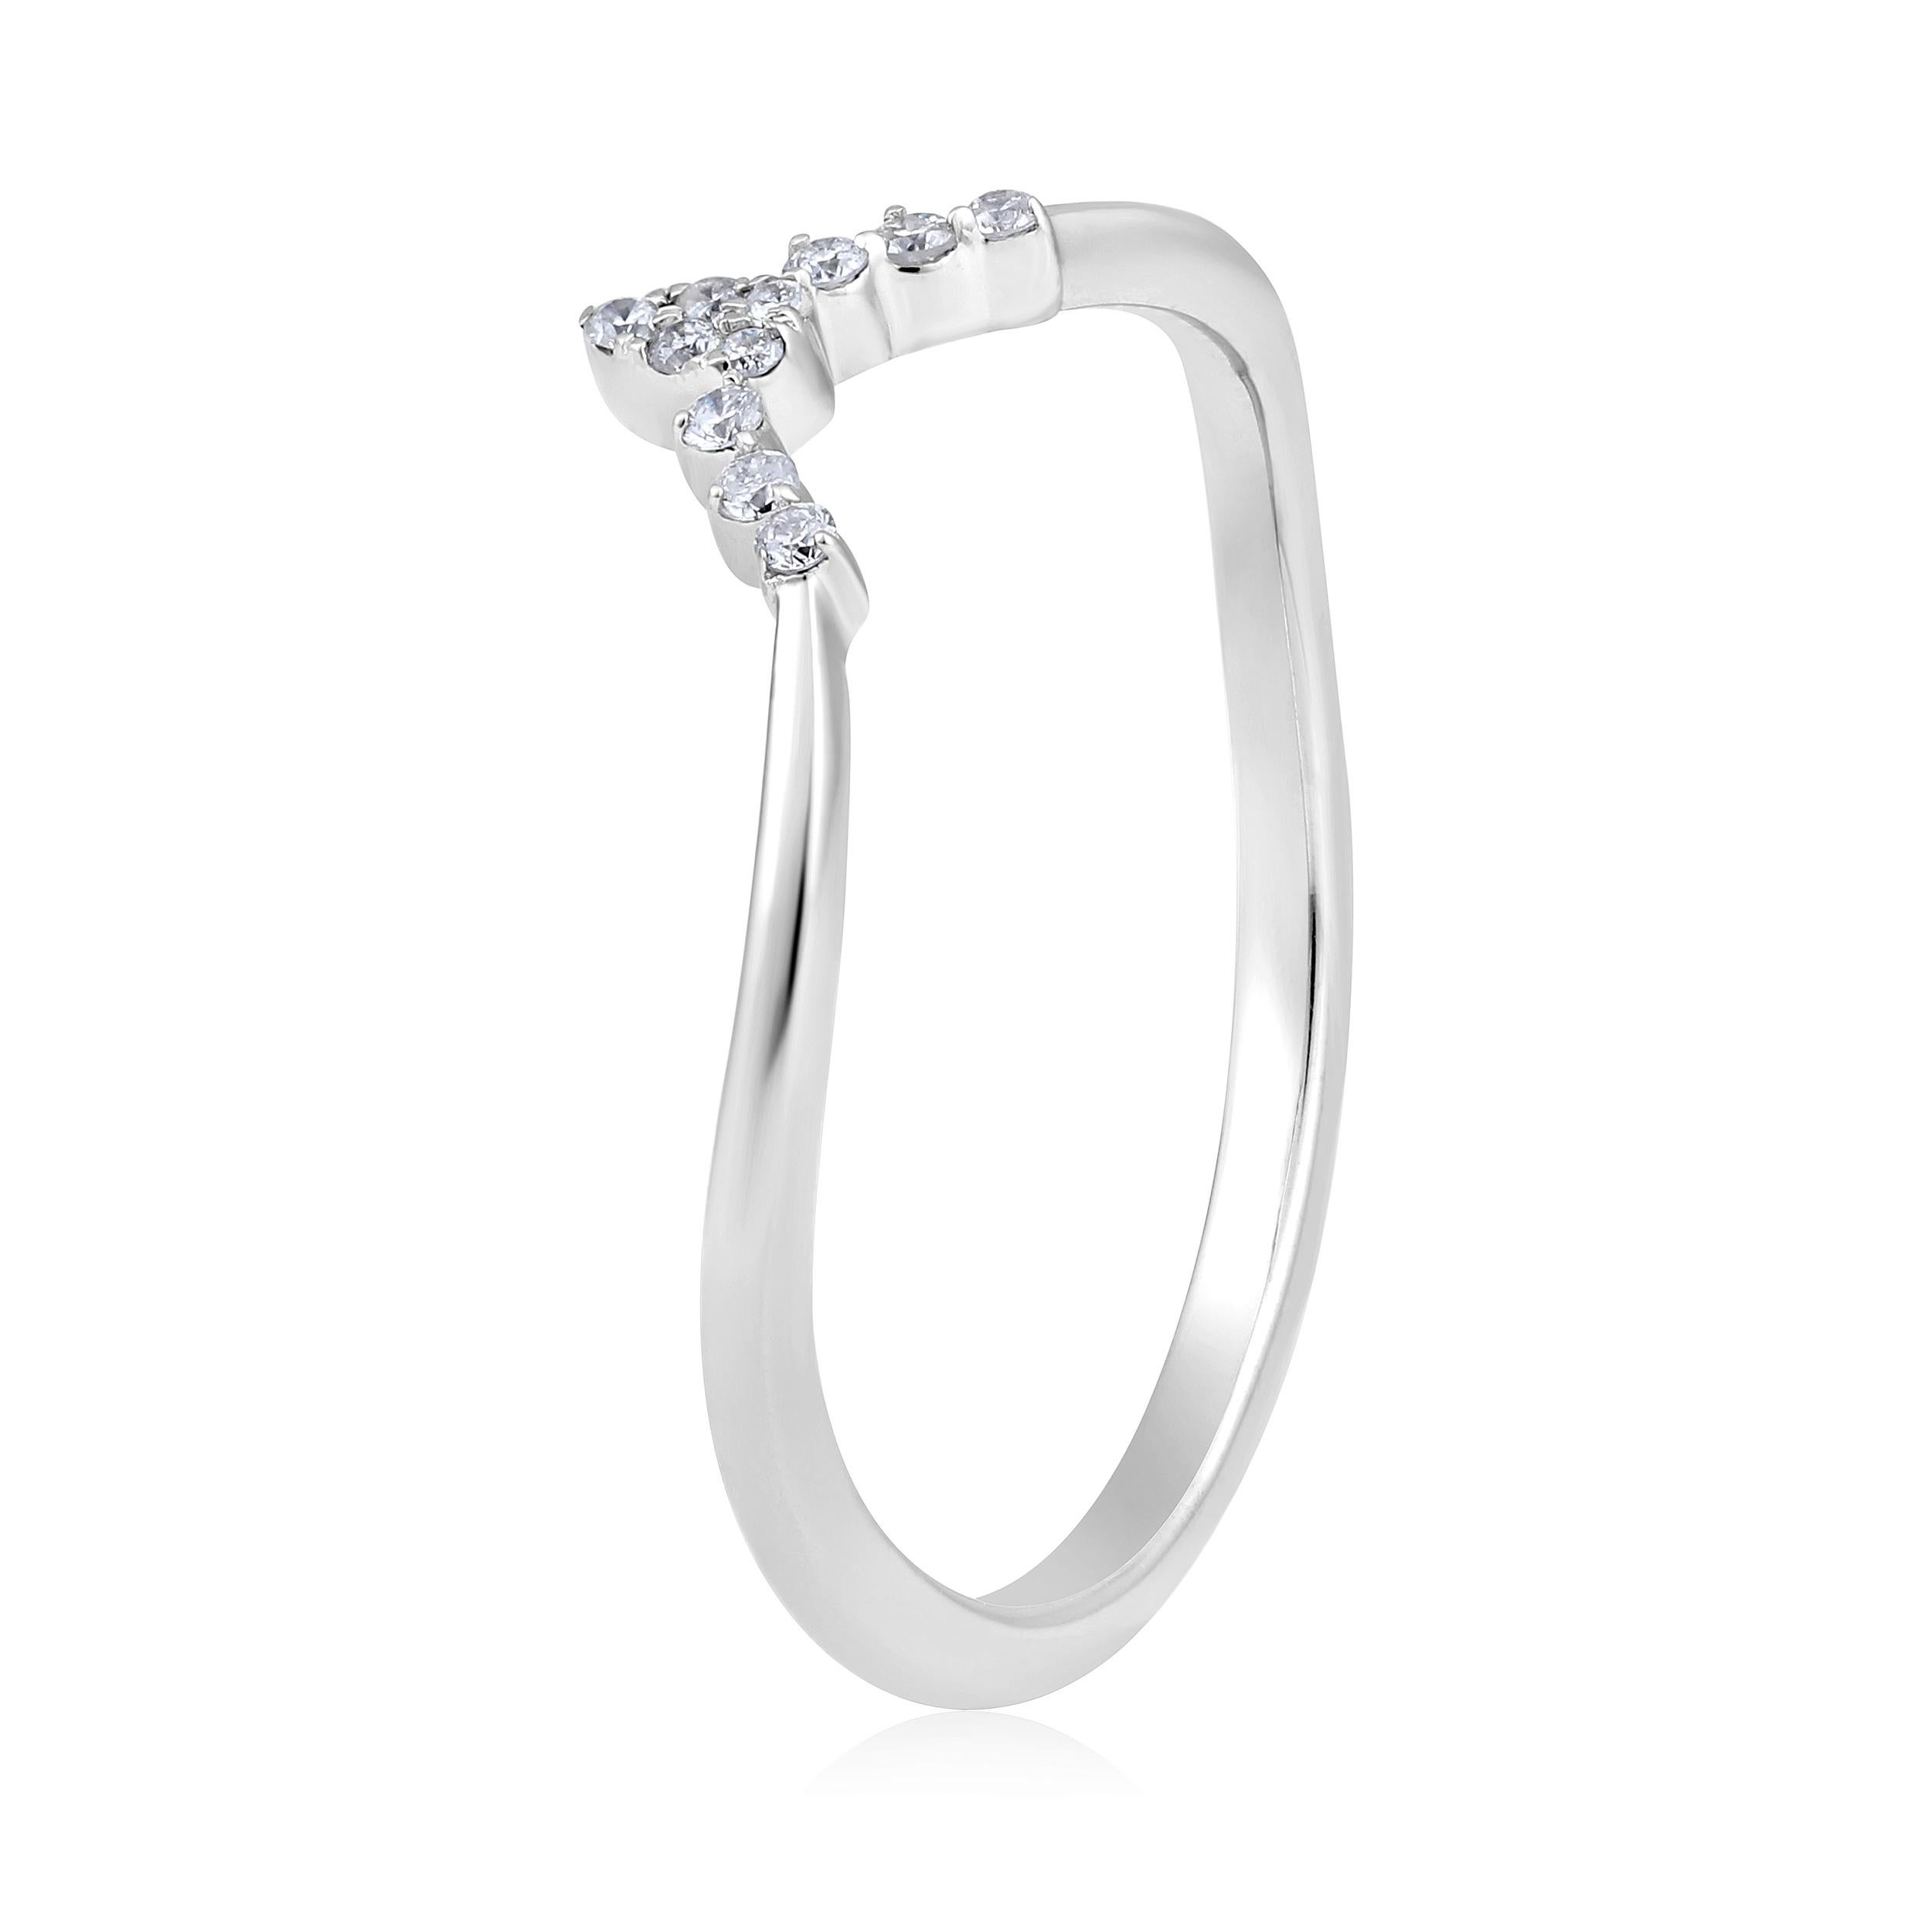 Ring Size: US 8 

Crafted in 1.33 grams of 10K White Gold, the ring contains 11 stones of Round Diamonds with a total of 0.06 carat in F-G color and I1-I2 clarity.

CONTEMPORARY AND TIMELESS ESSENCE: Crafted in 14-karat/18-karat with 100% natural